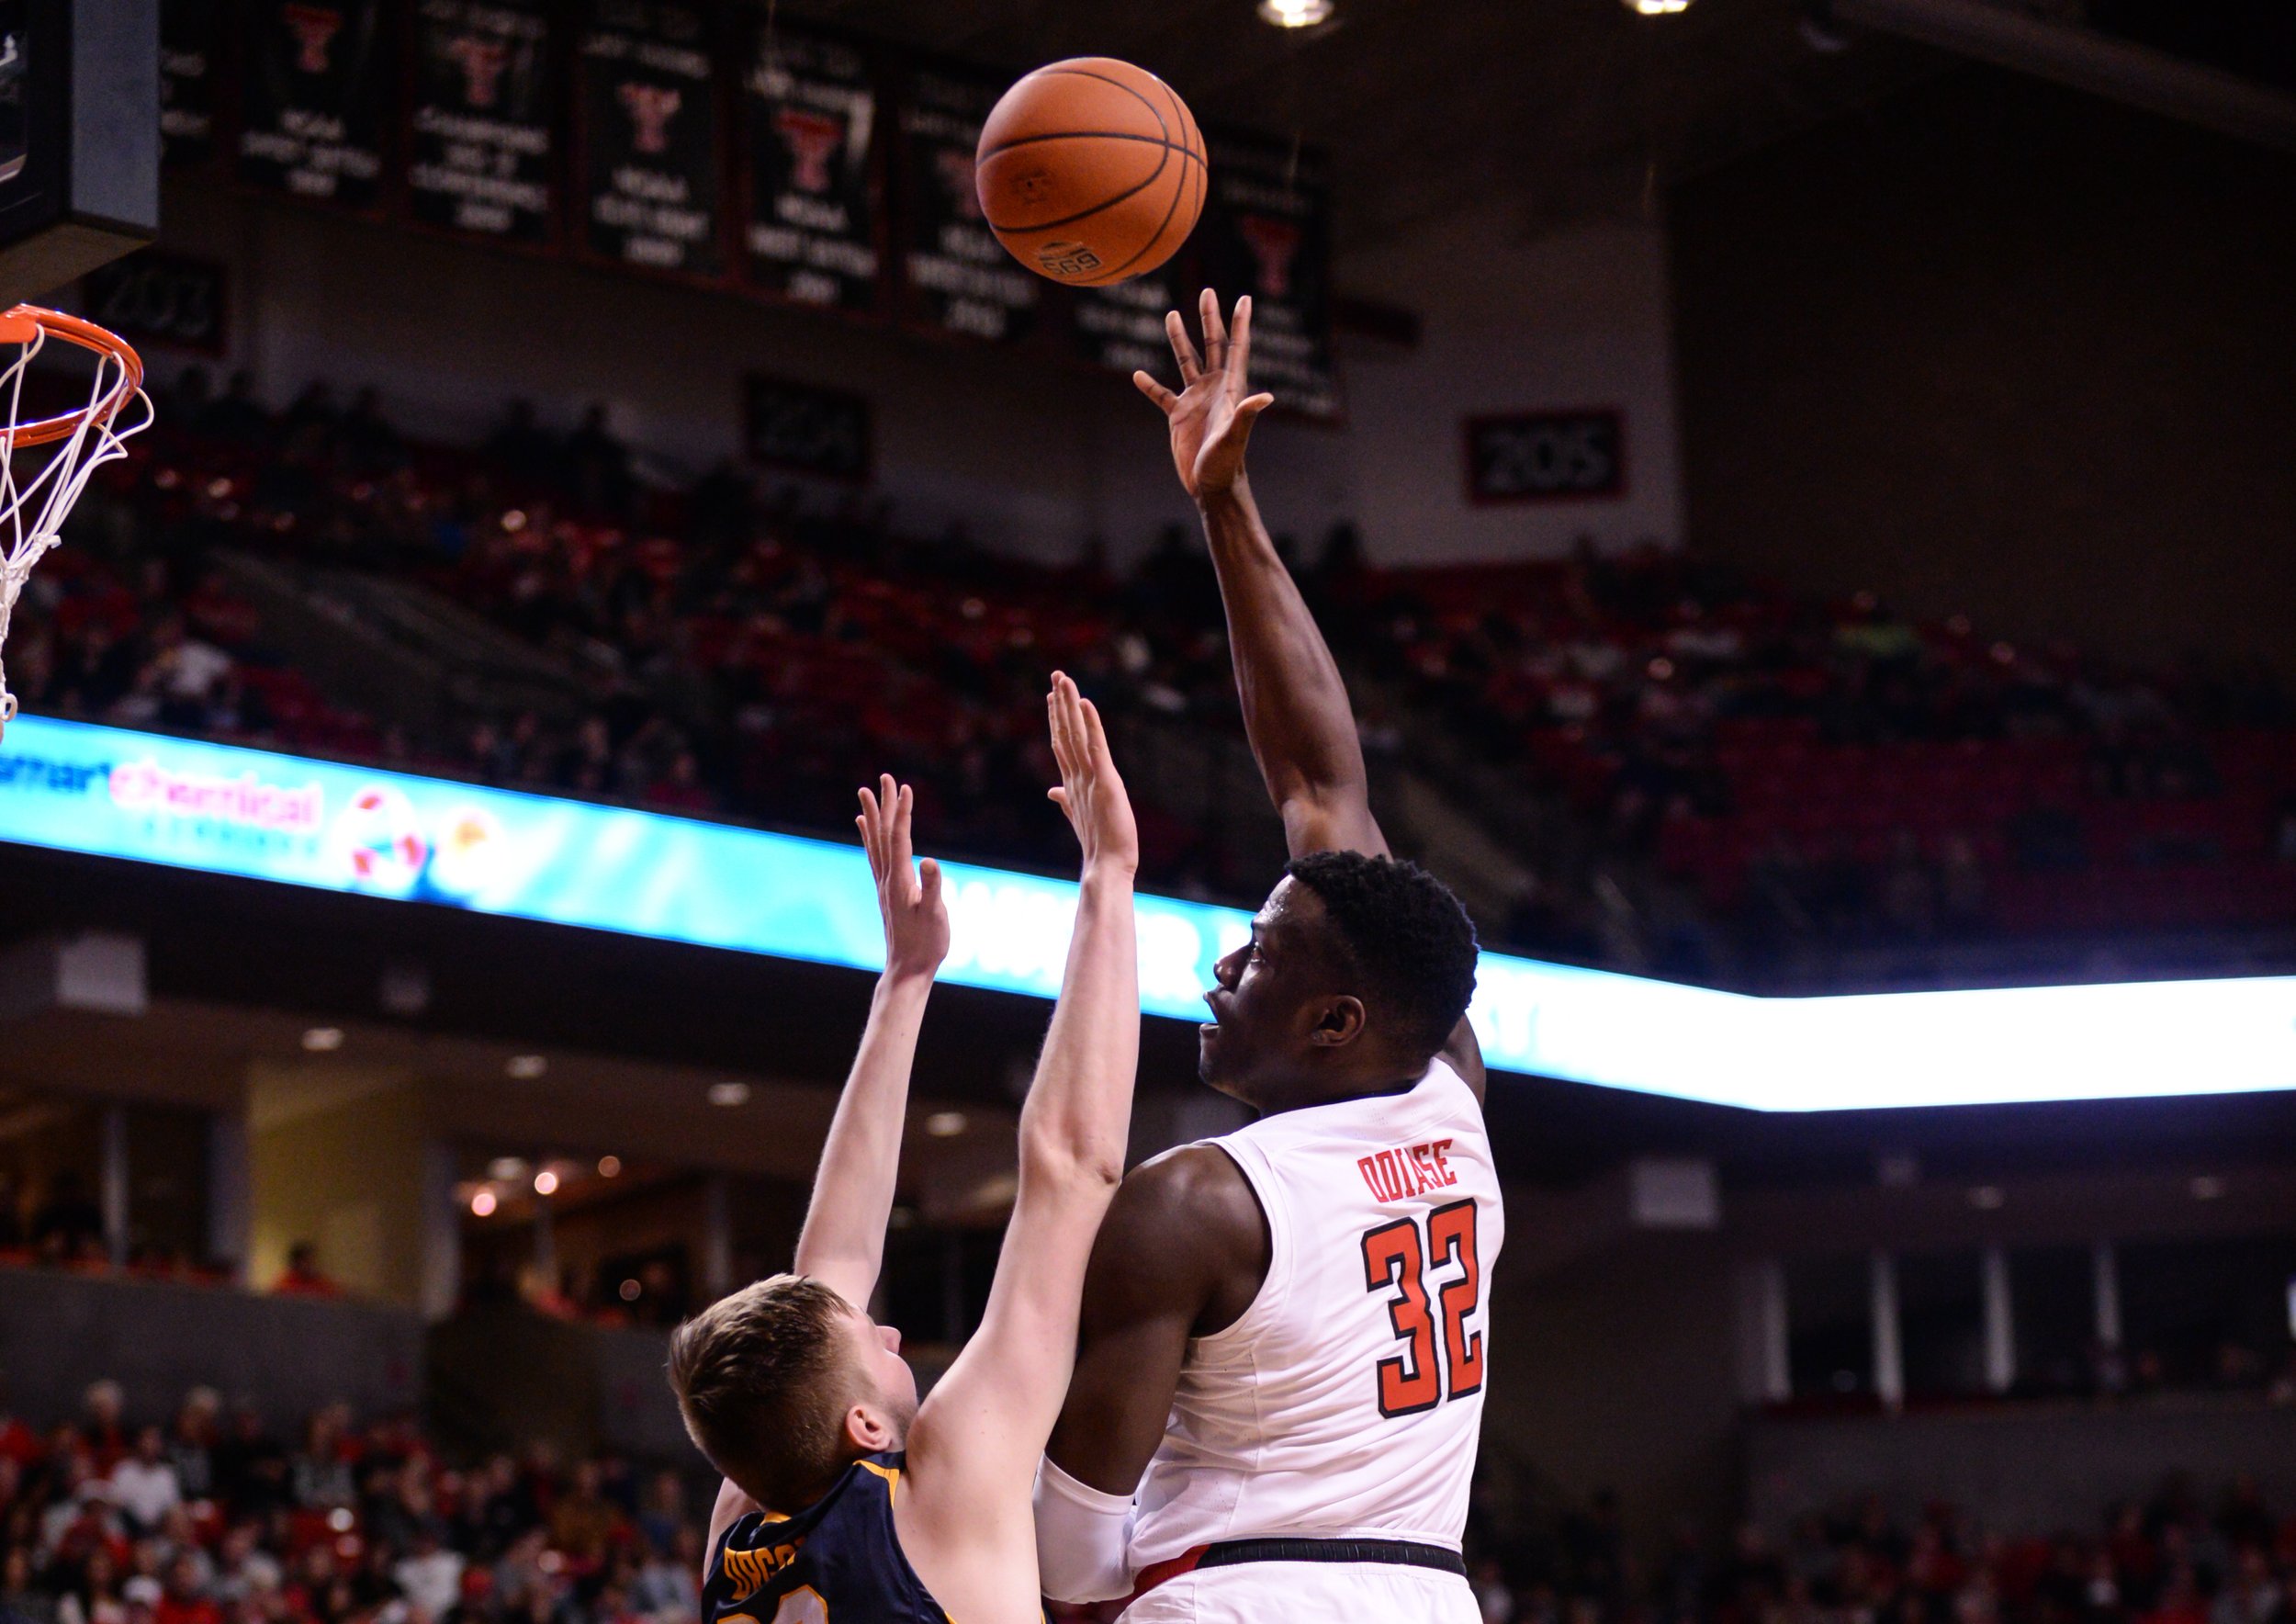  Texas Tech's Norense Odiase (32) overhands a shot during the game Saturday, Nov. 24, 2018 at United Supermarkets Arena in Lubbock, Texas. [Abbie Burnett/A-J Media] 